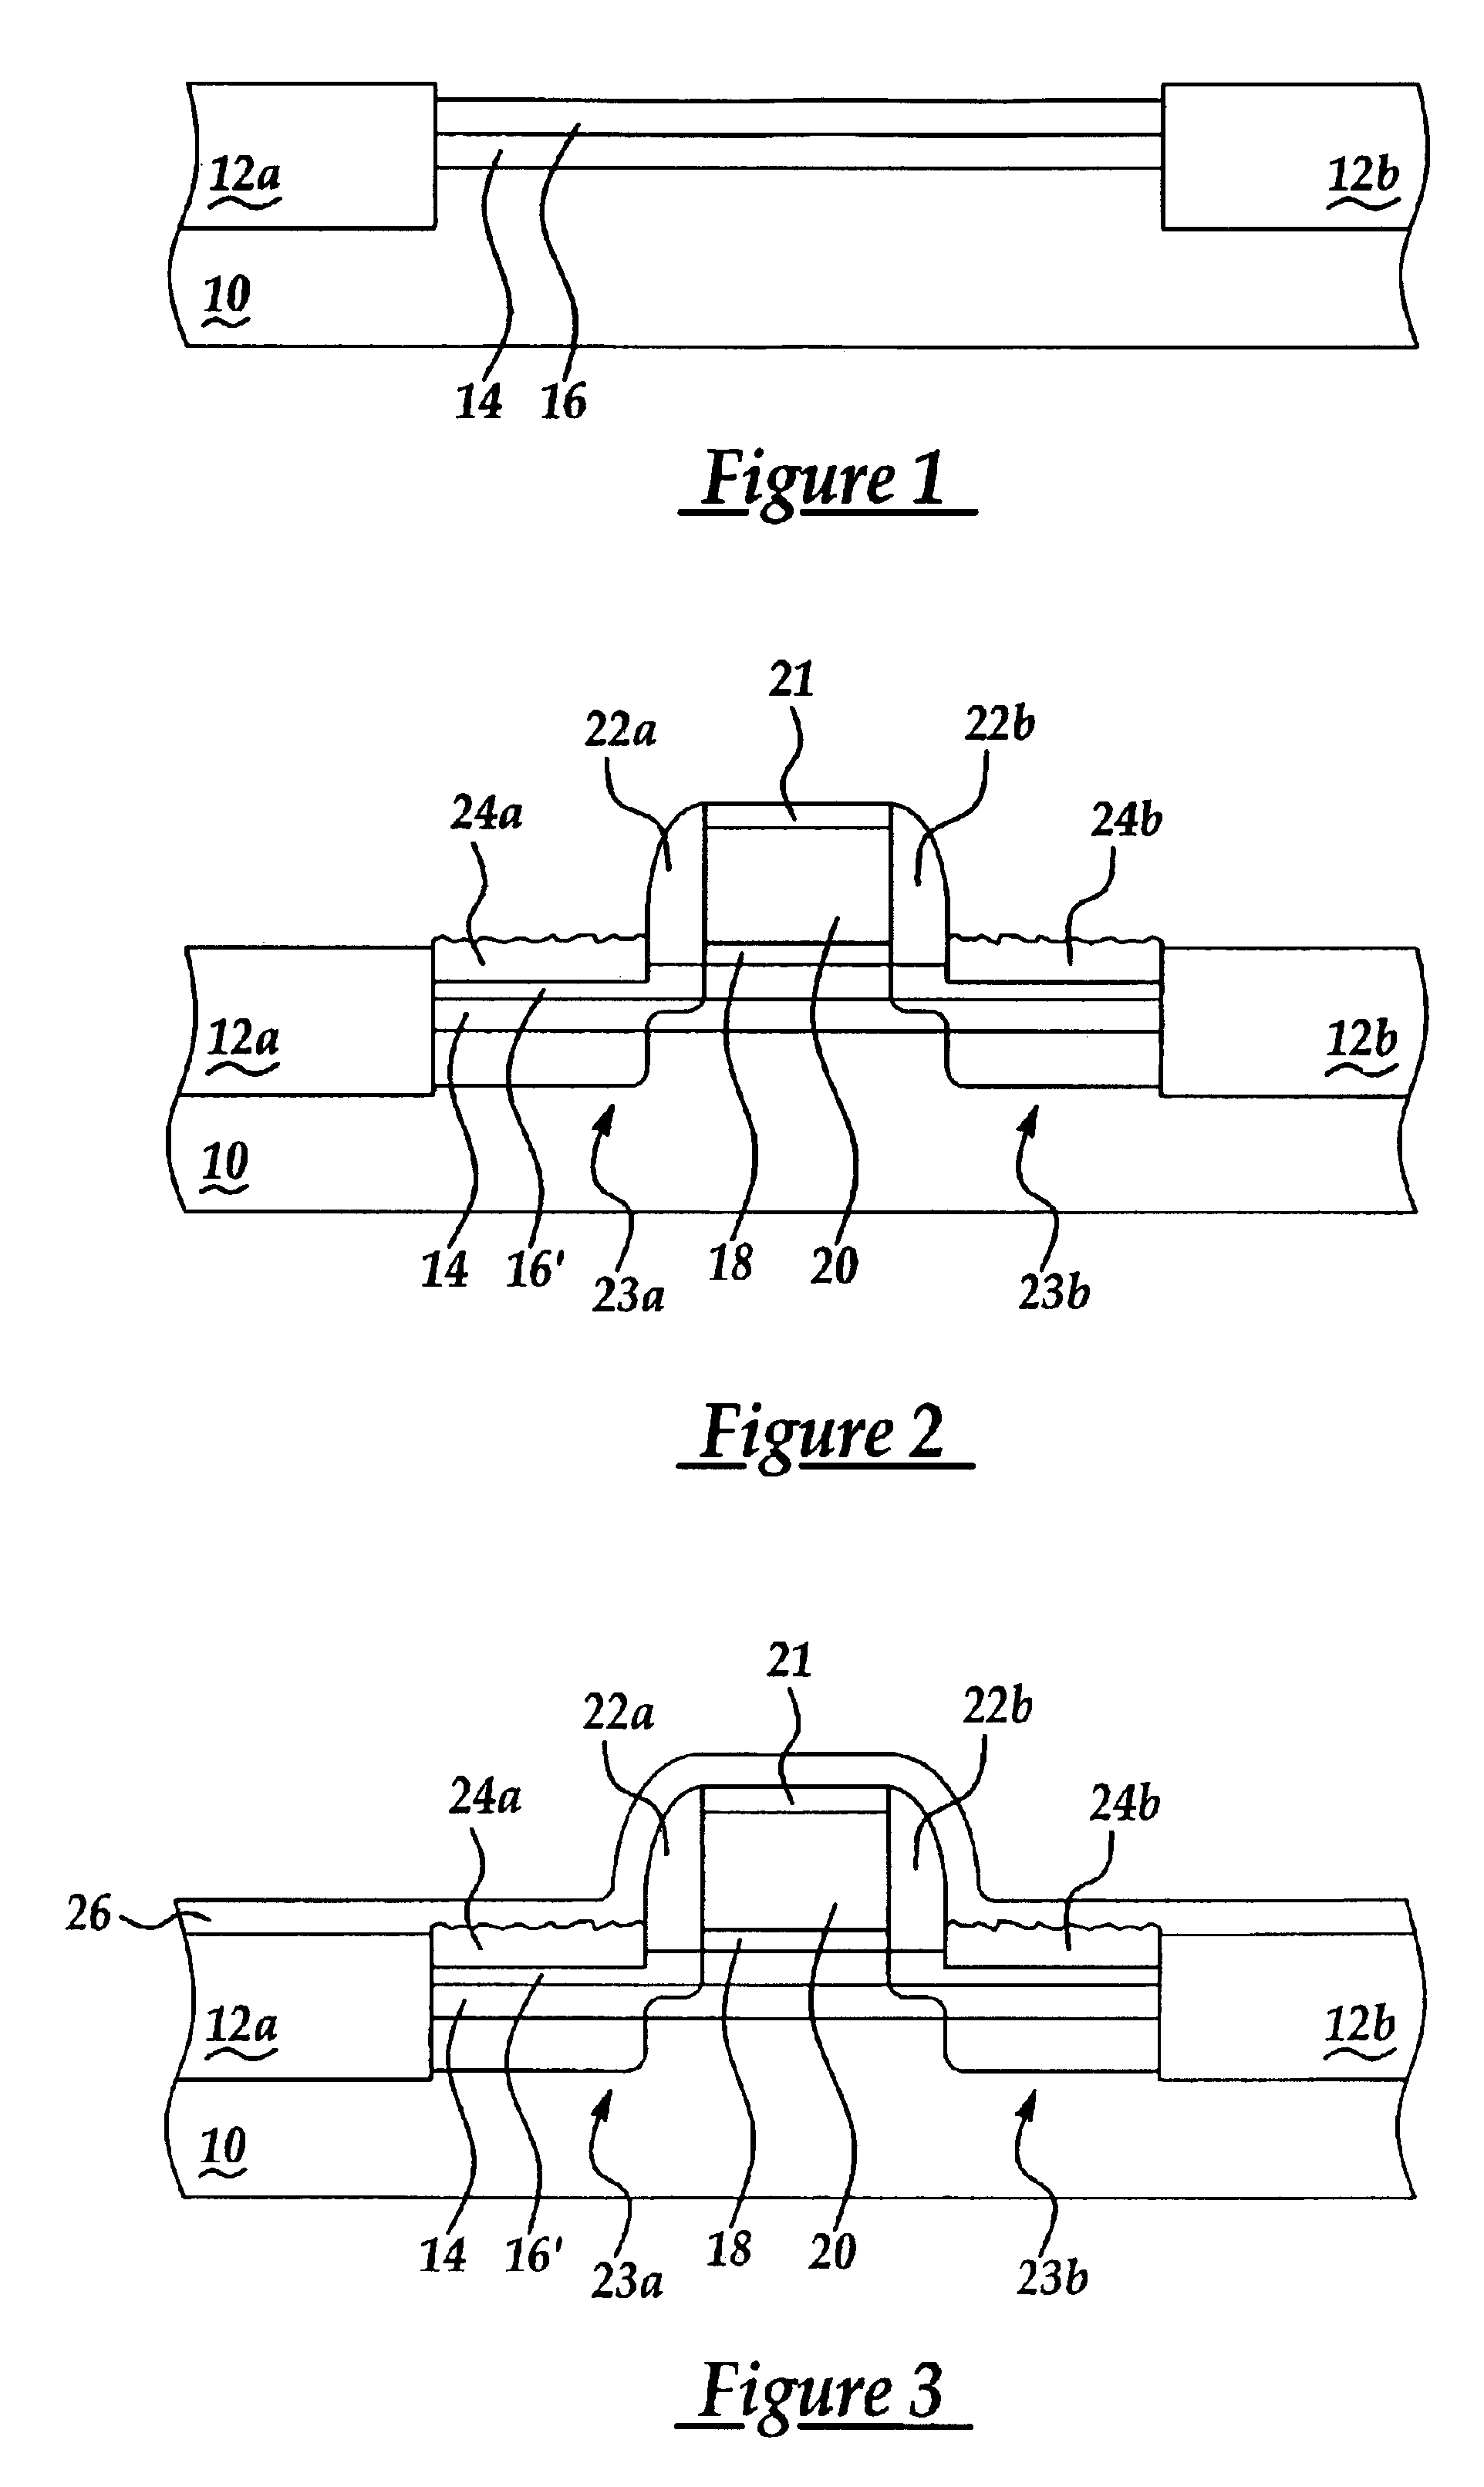 Strained silicon layer semiconductor product employing strained insulator layer